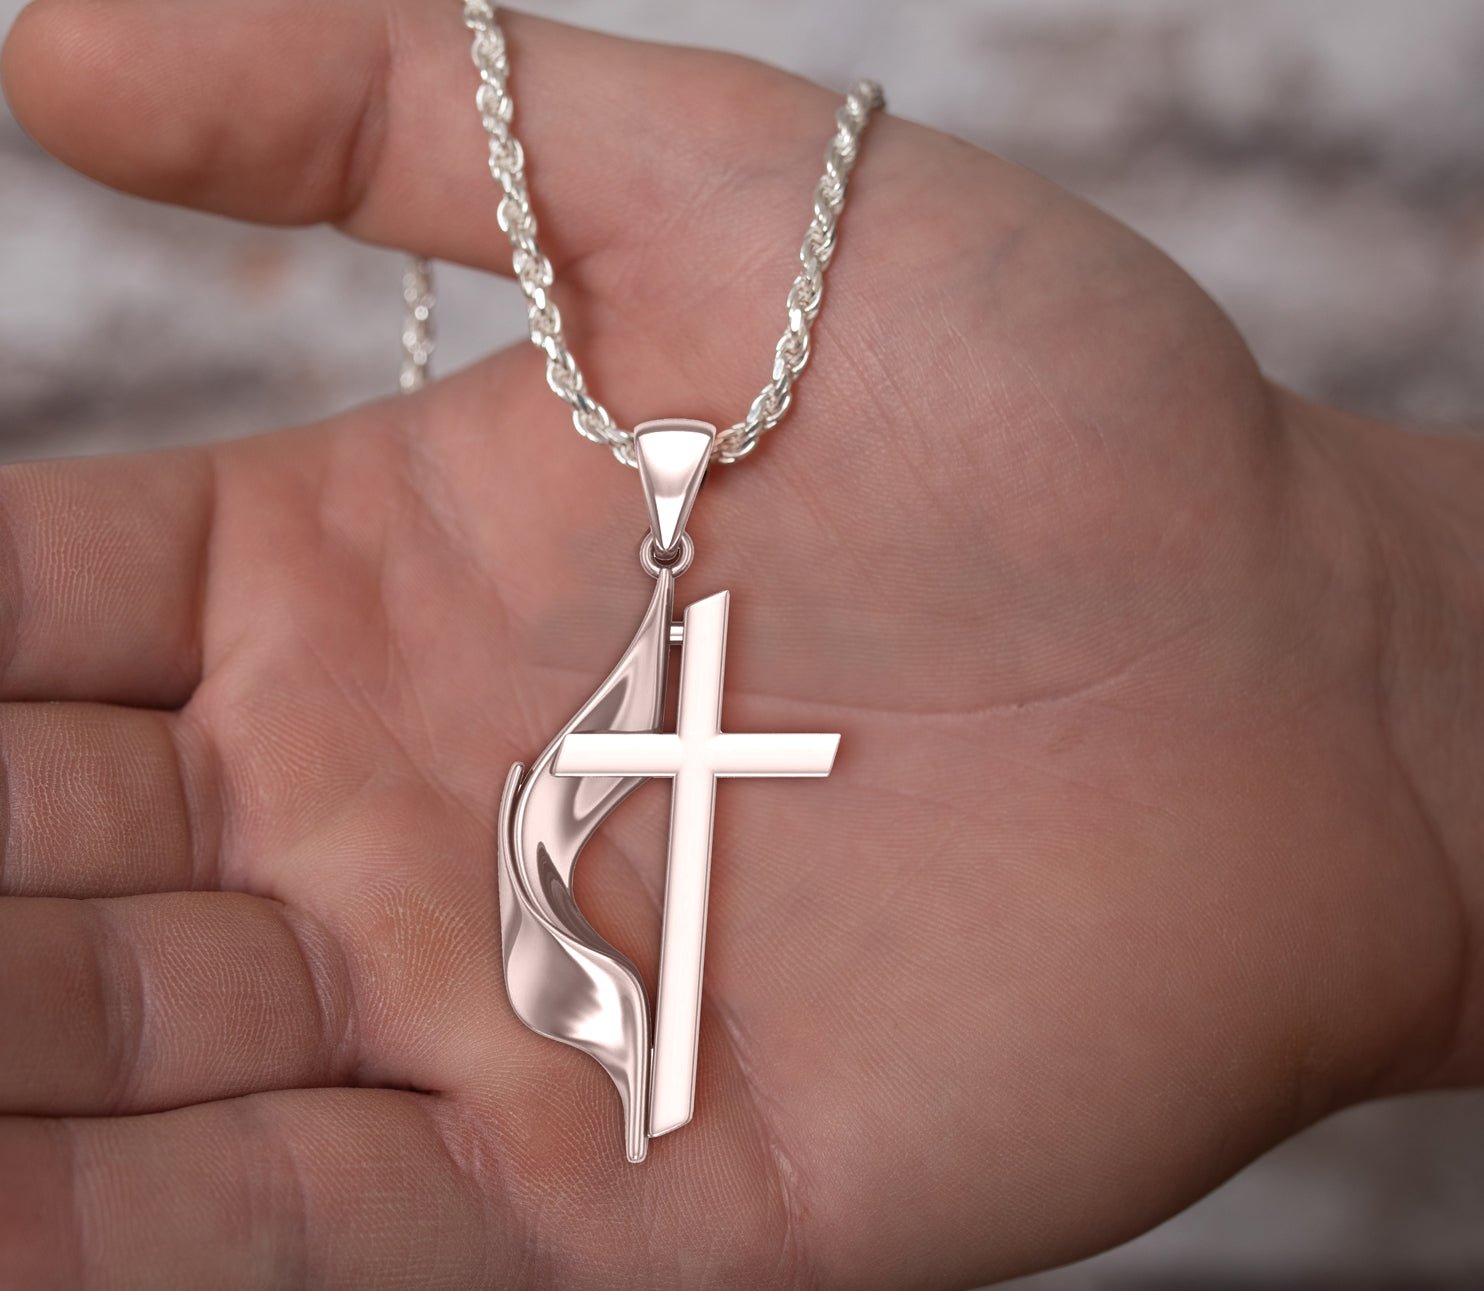 Methodist Cross Necklace Or Pendant - R1629ABSF5KIT:137428:P – Allure by  Greatons Jewelers